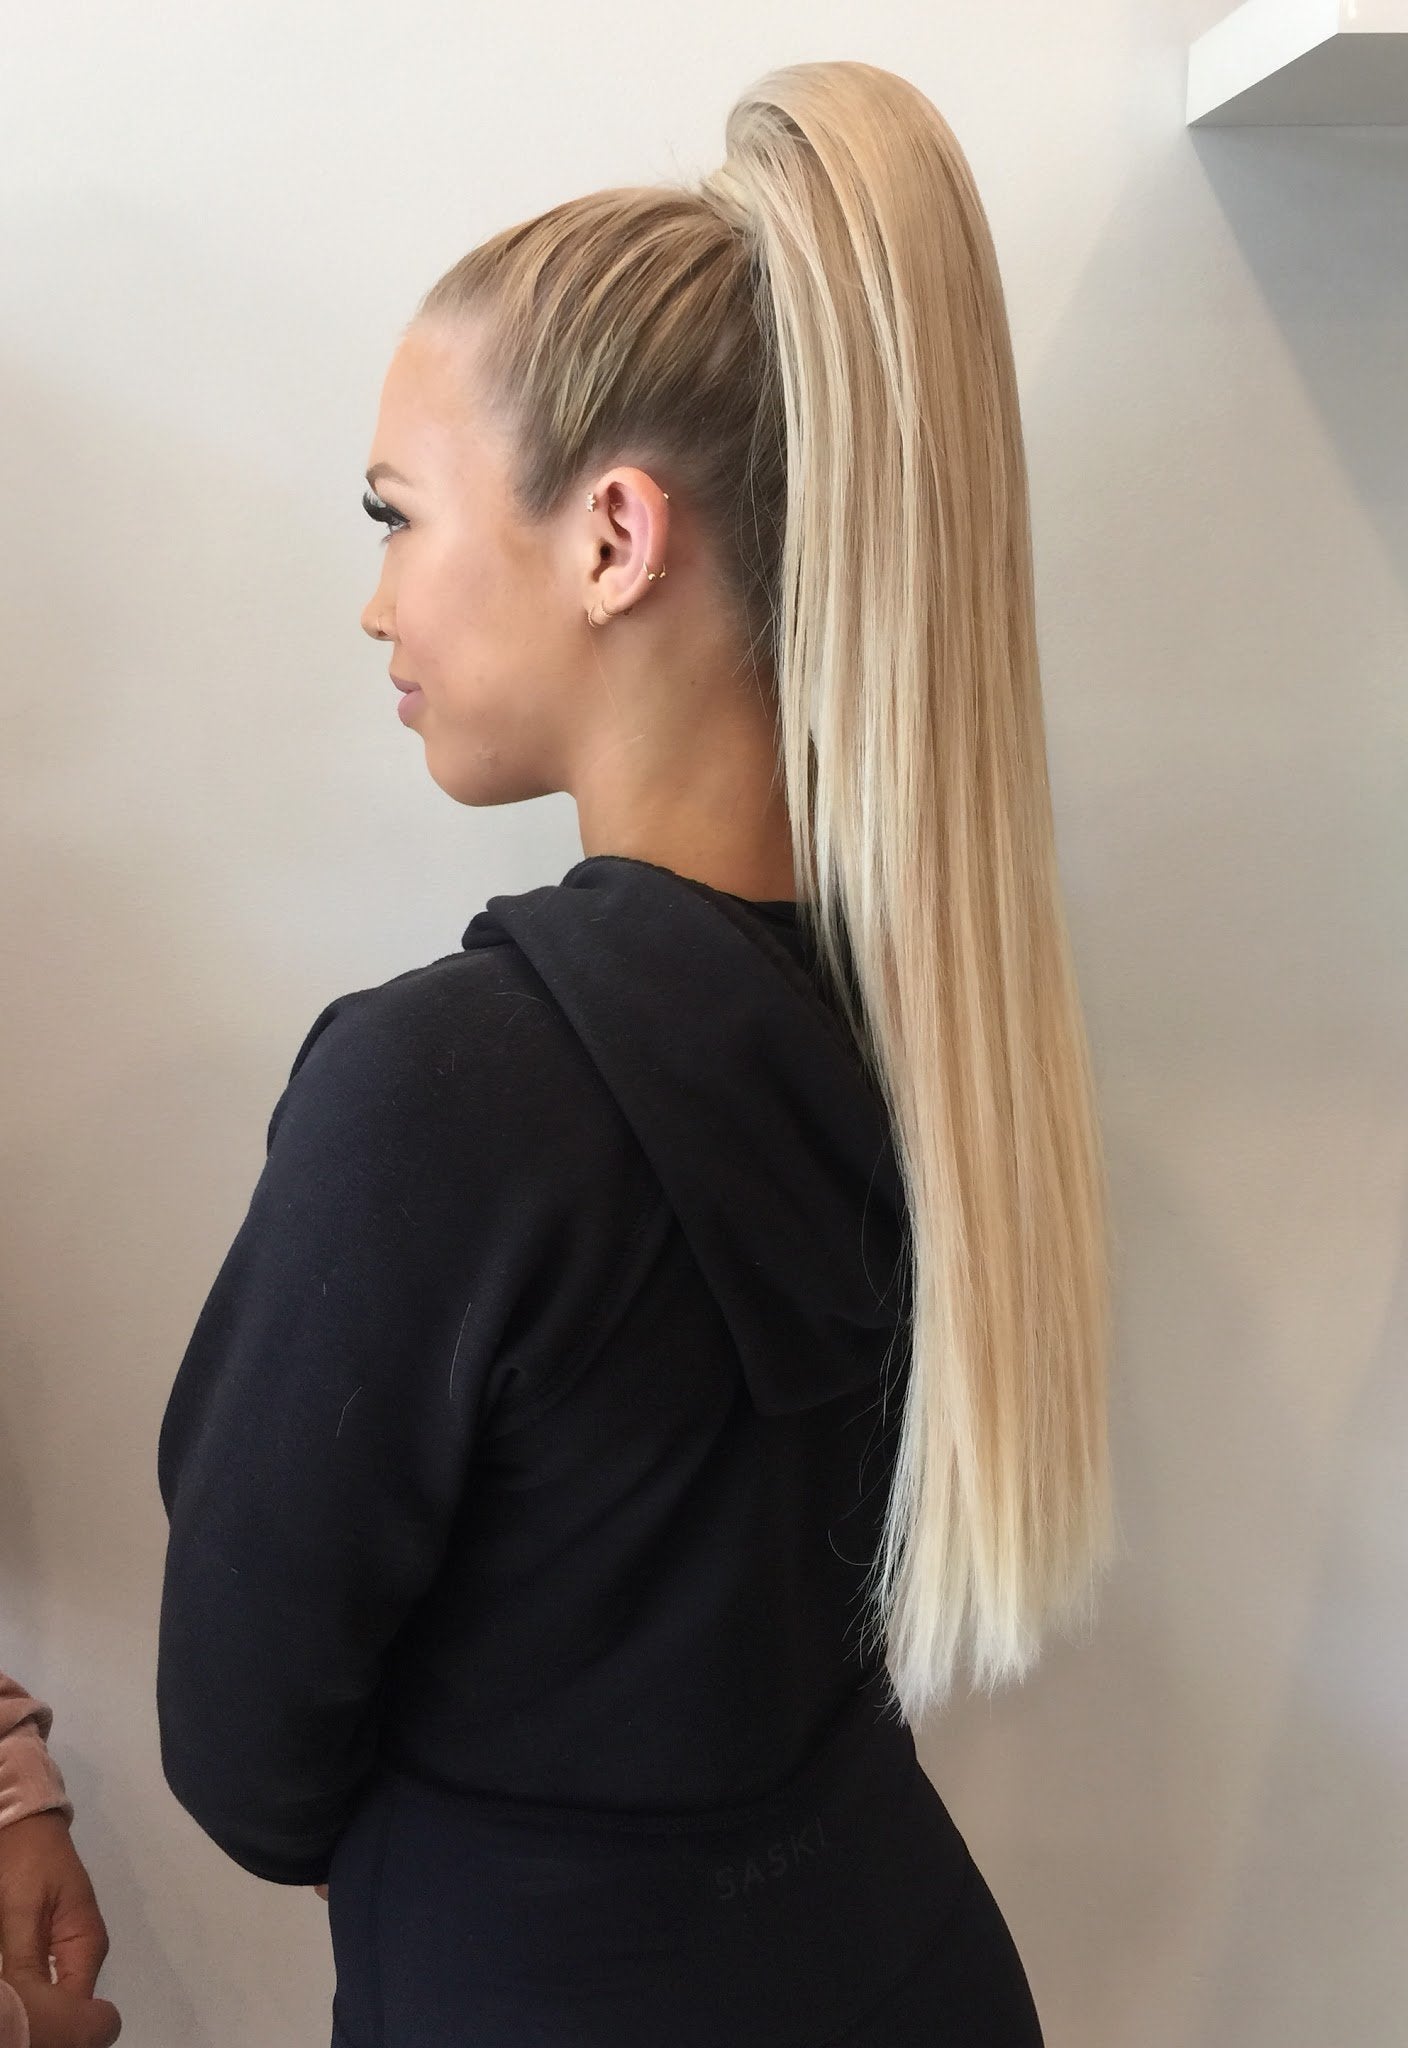 Vanilla Blonde #60 clip on ponytail hair extensions 22inch classic 22inch, Blonde Hair looks, Blonde Hair Styles, Hair Extensions Gold Coast, Hair Extensions Online, Cheap Hair Extensions, Good Quality Fusion Hair Extensions, Good Quality Fusion Hair Extensions, Straight hair, Blonde Permanent Straight Hair